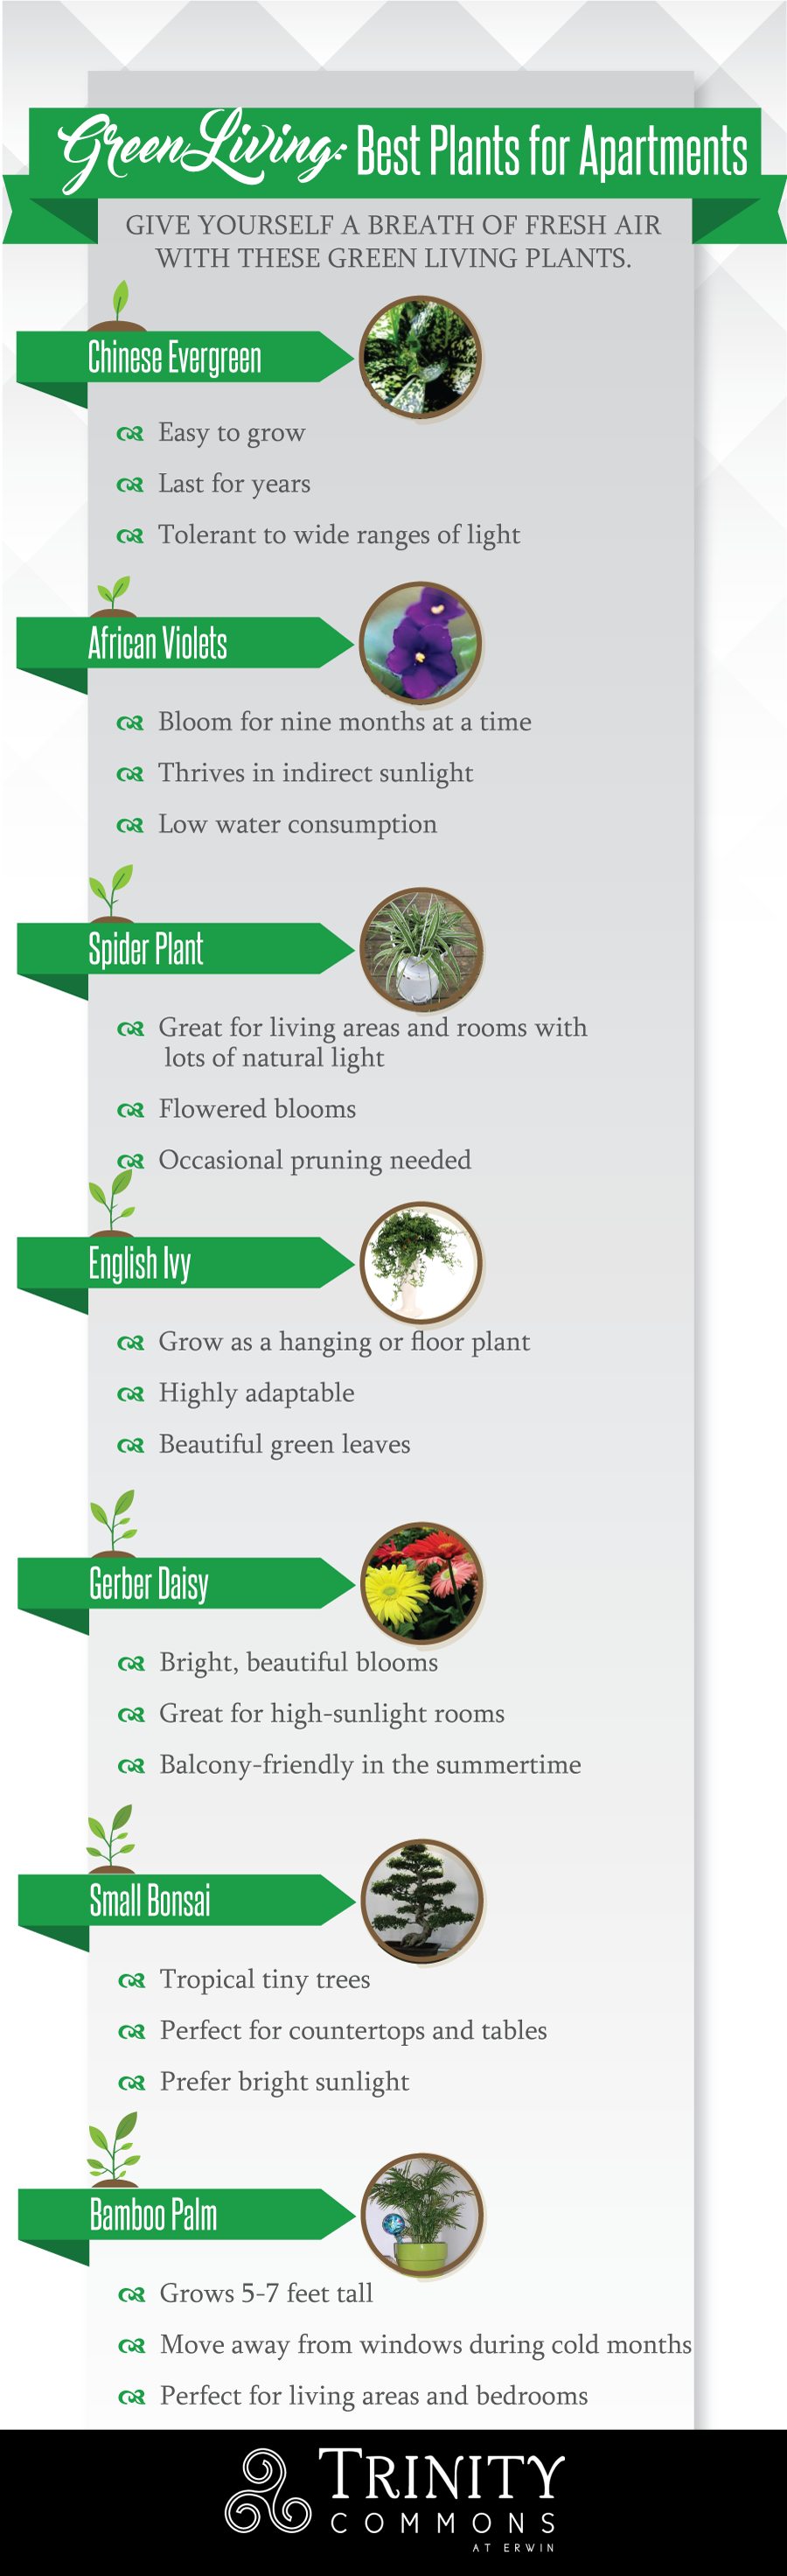 Best Plants for Apartments Infographic 